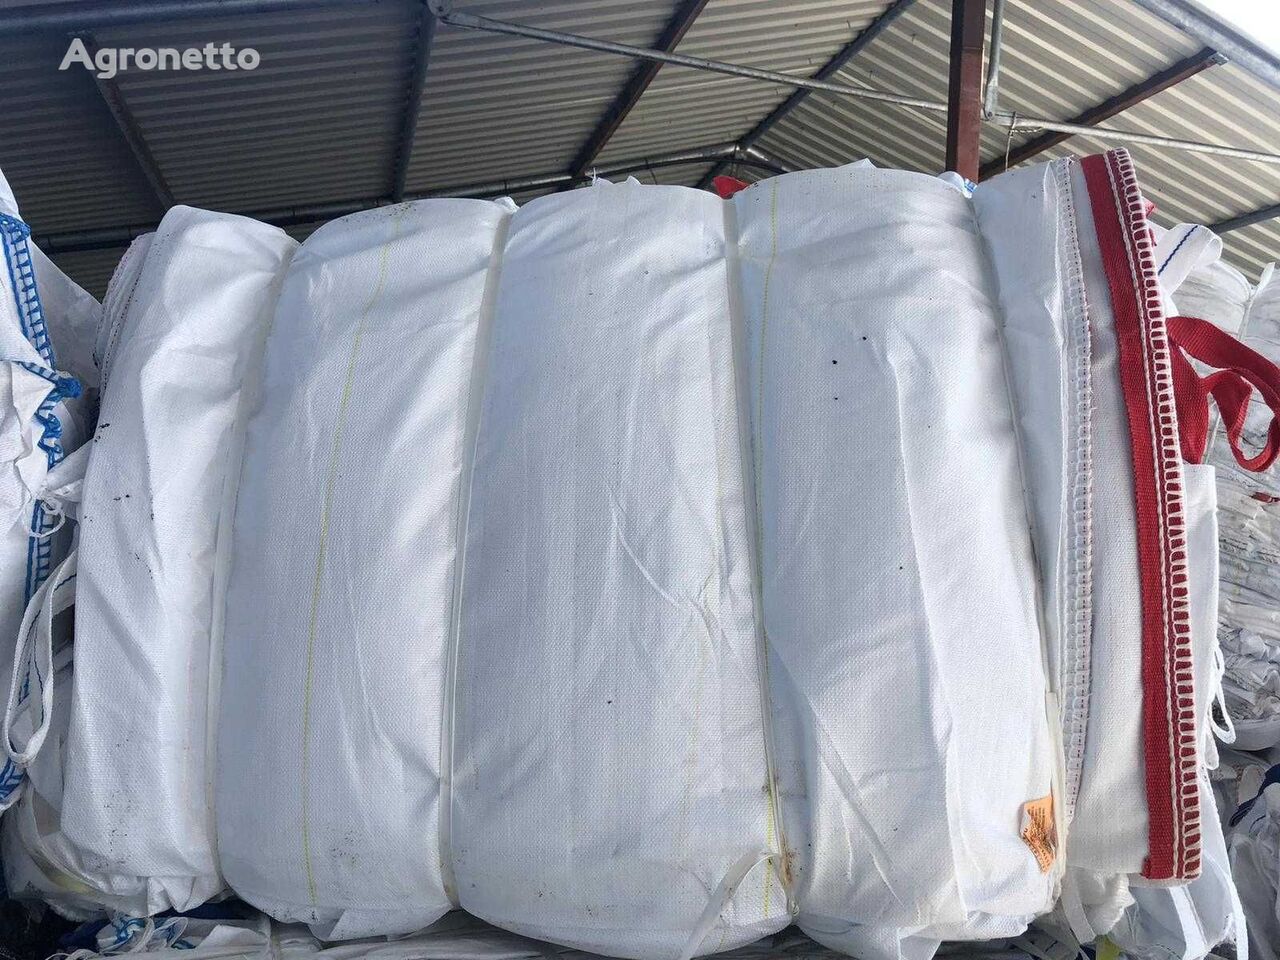 Big bags for agricultural products, big bag 24, 1500 kg